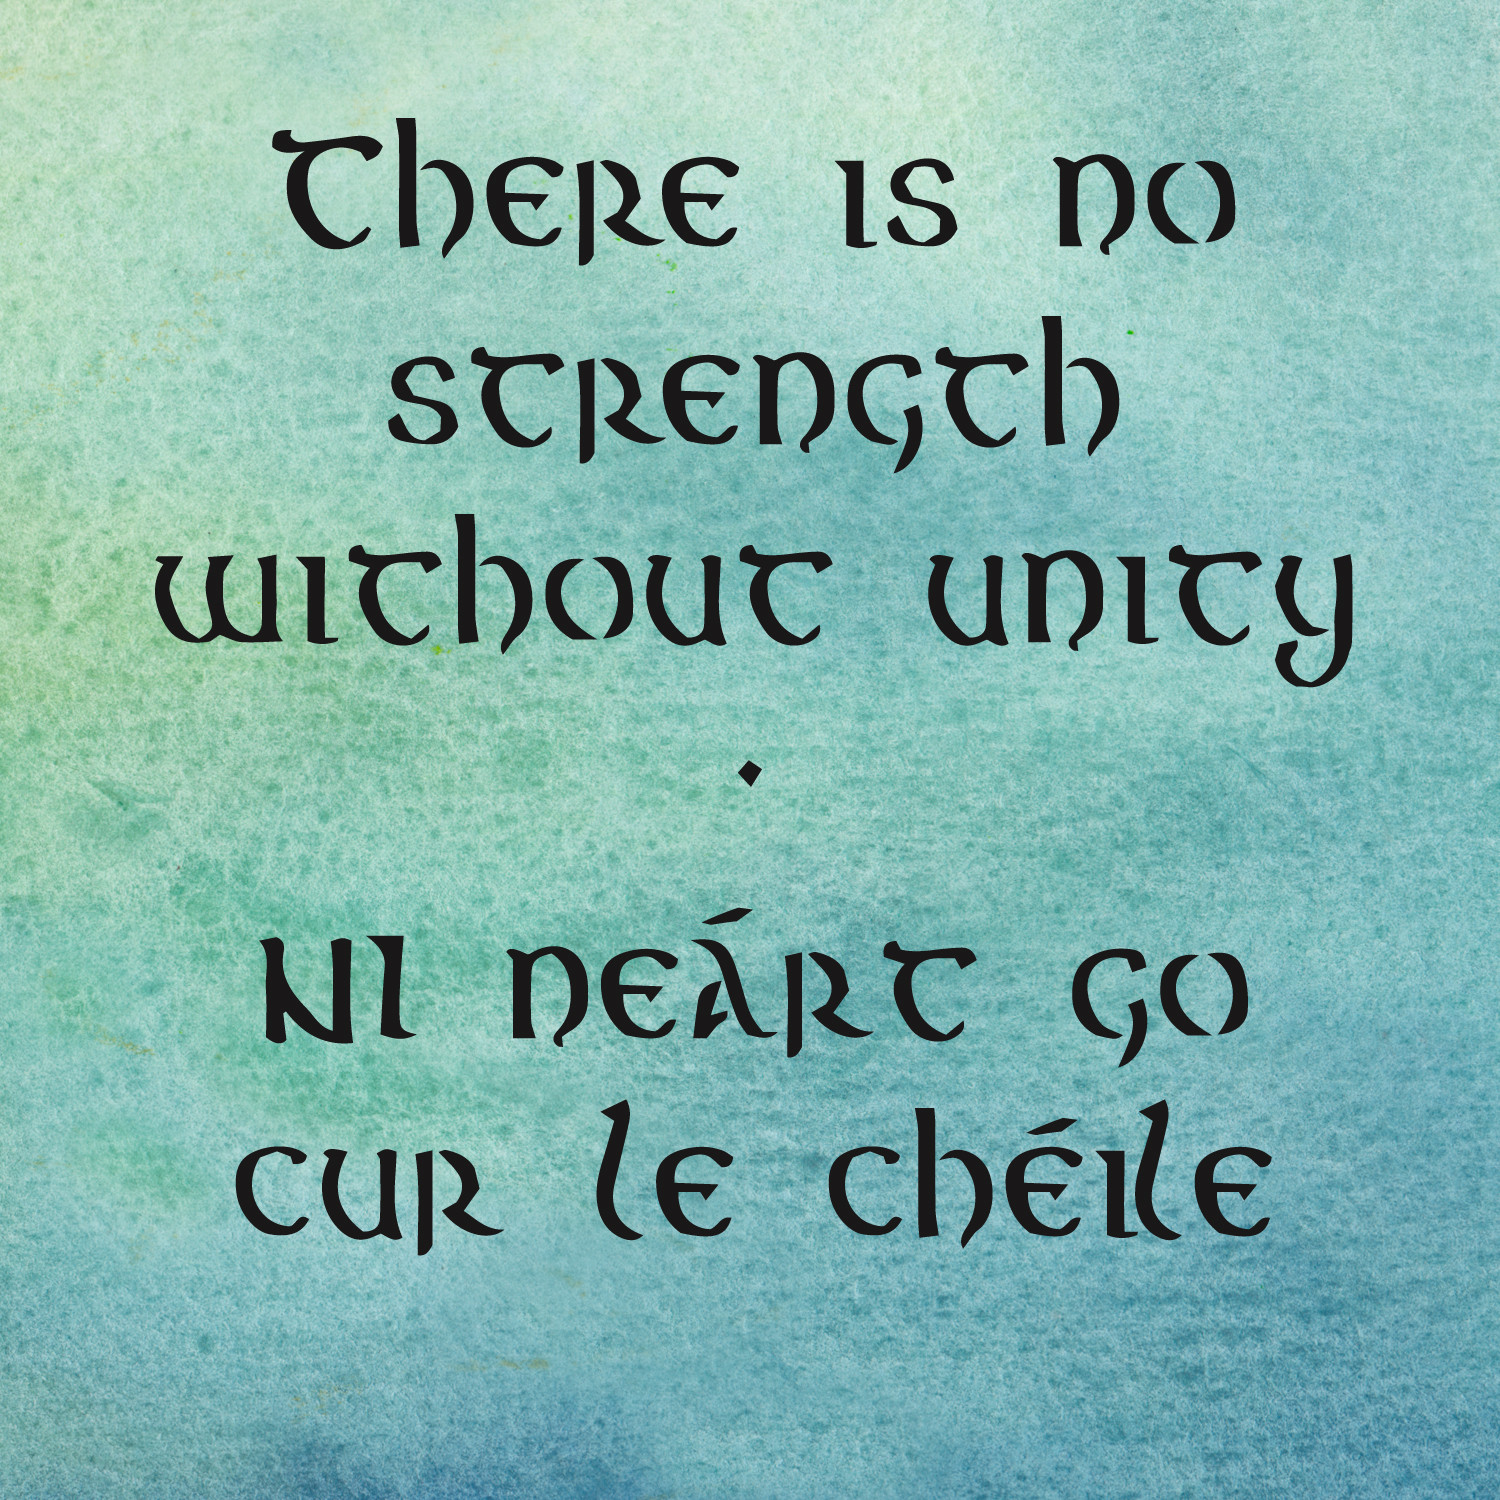 Irish Friendship Quotes
 Irish Wisdom There is no strength without unity by